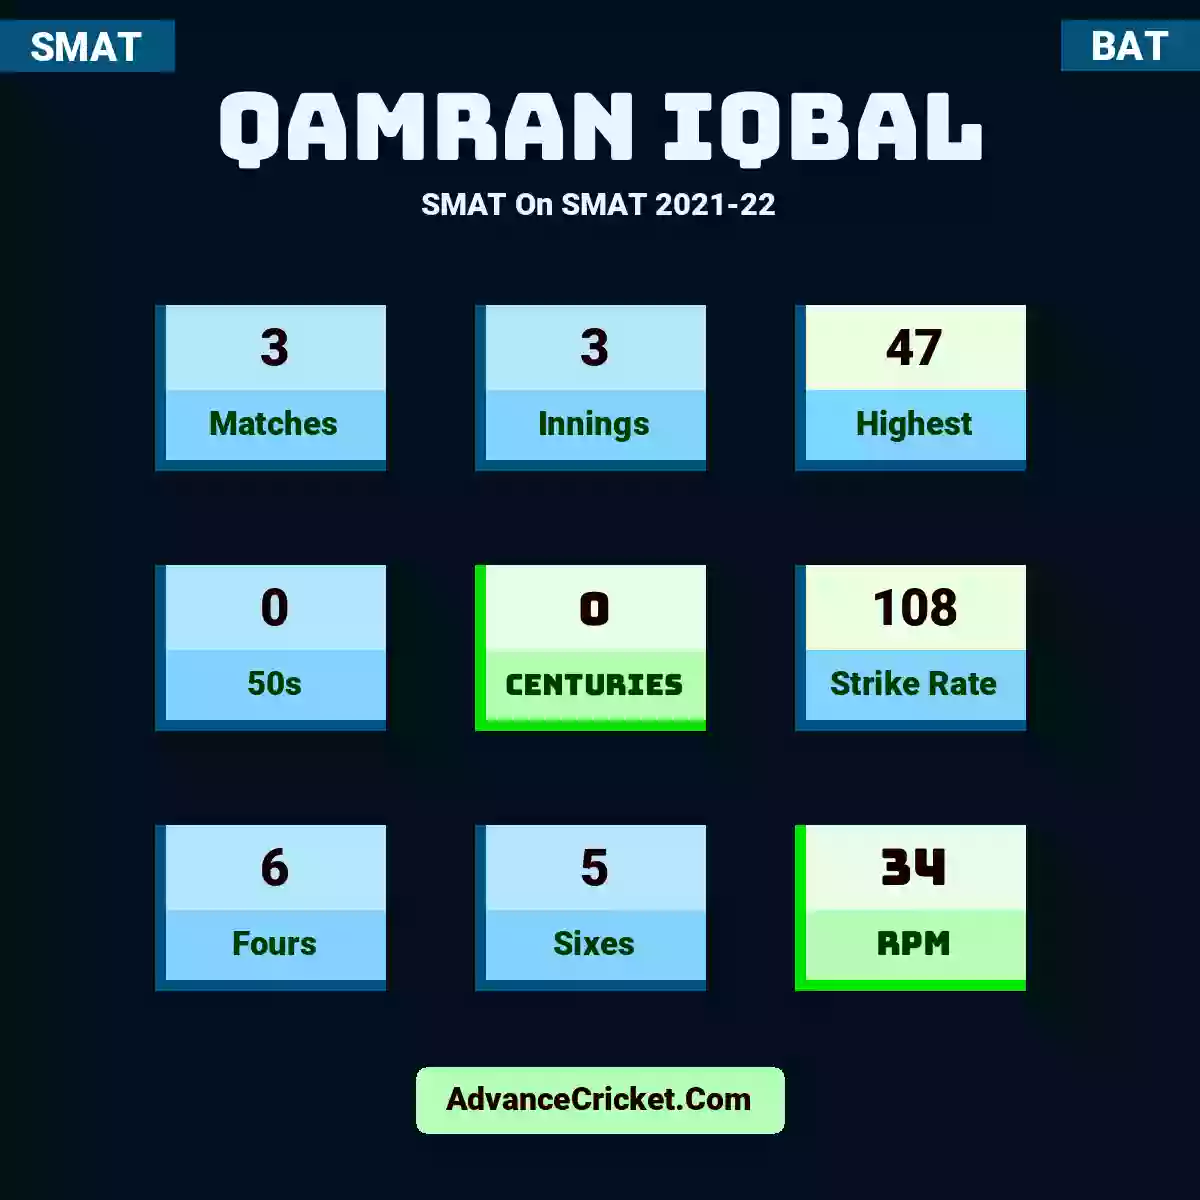 Qamran Iqbal SMAT  On SMAT 2021-22, Qamran Iqbal played 3 matches, scored 47 runs as highest, 0 half-centuries, and 0 centuries, with a strike rate of 108. Q.Iqbal hit 6 fours and 5 sixes, with an RPM of 34.